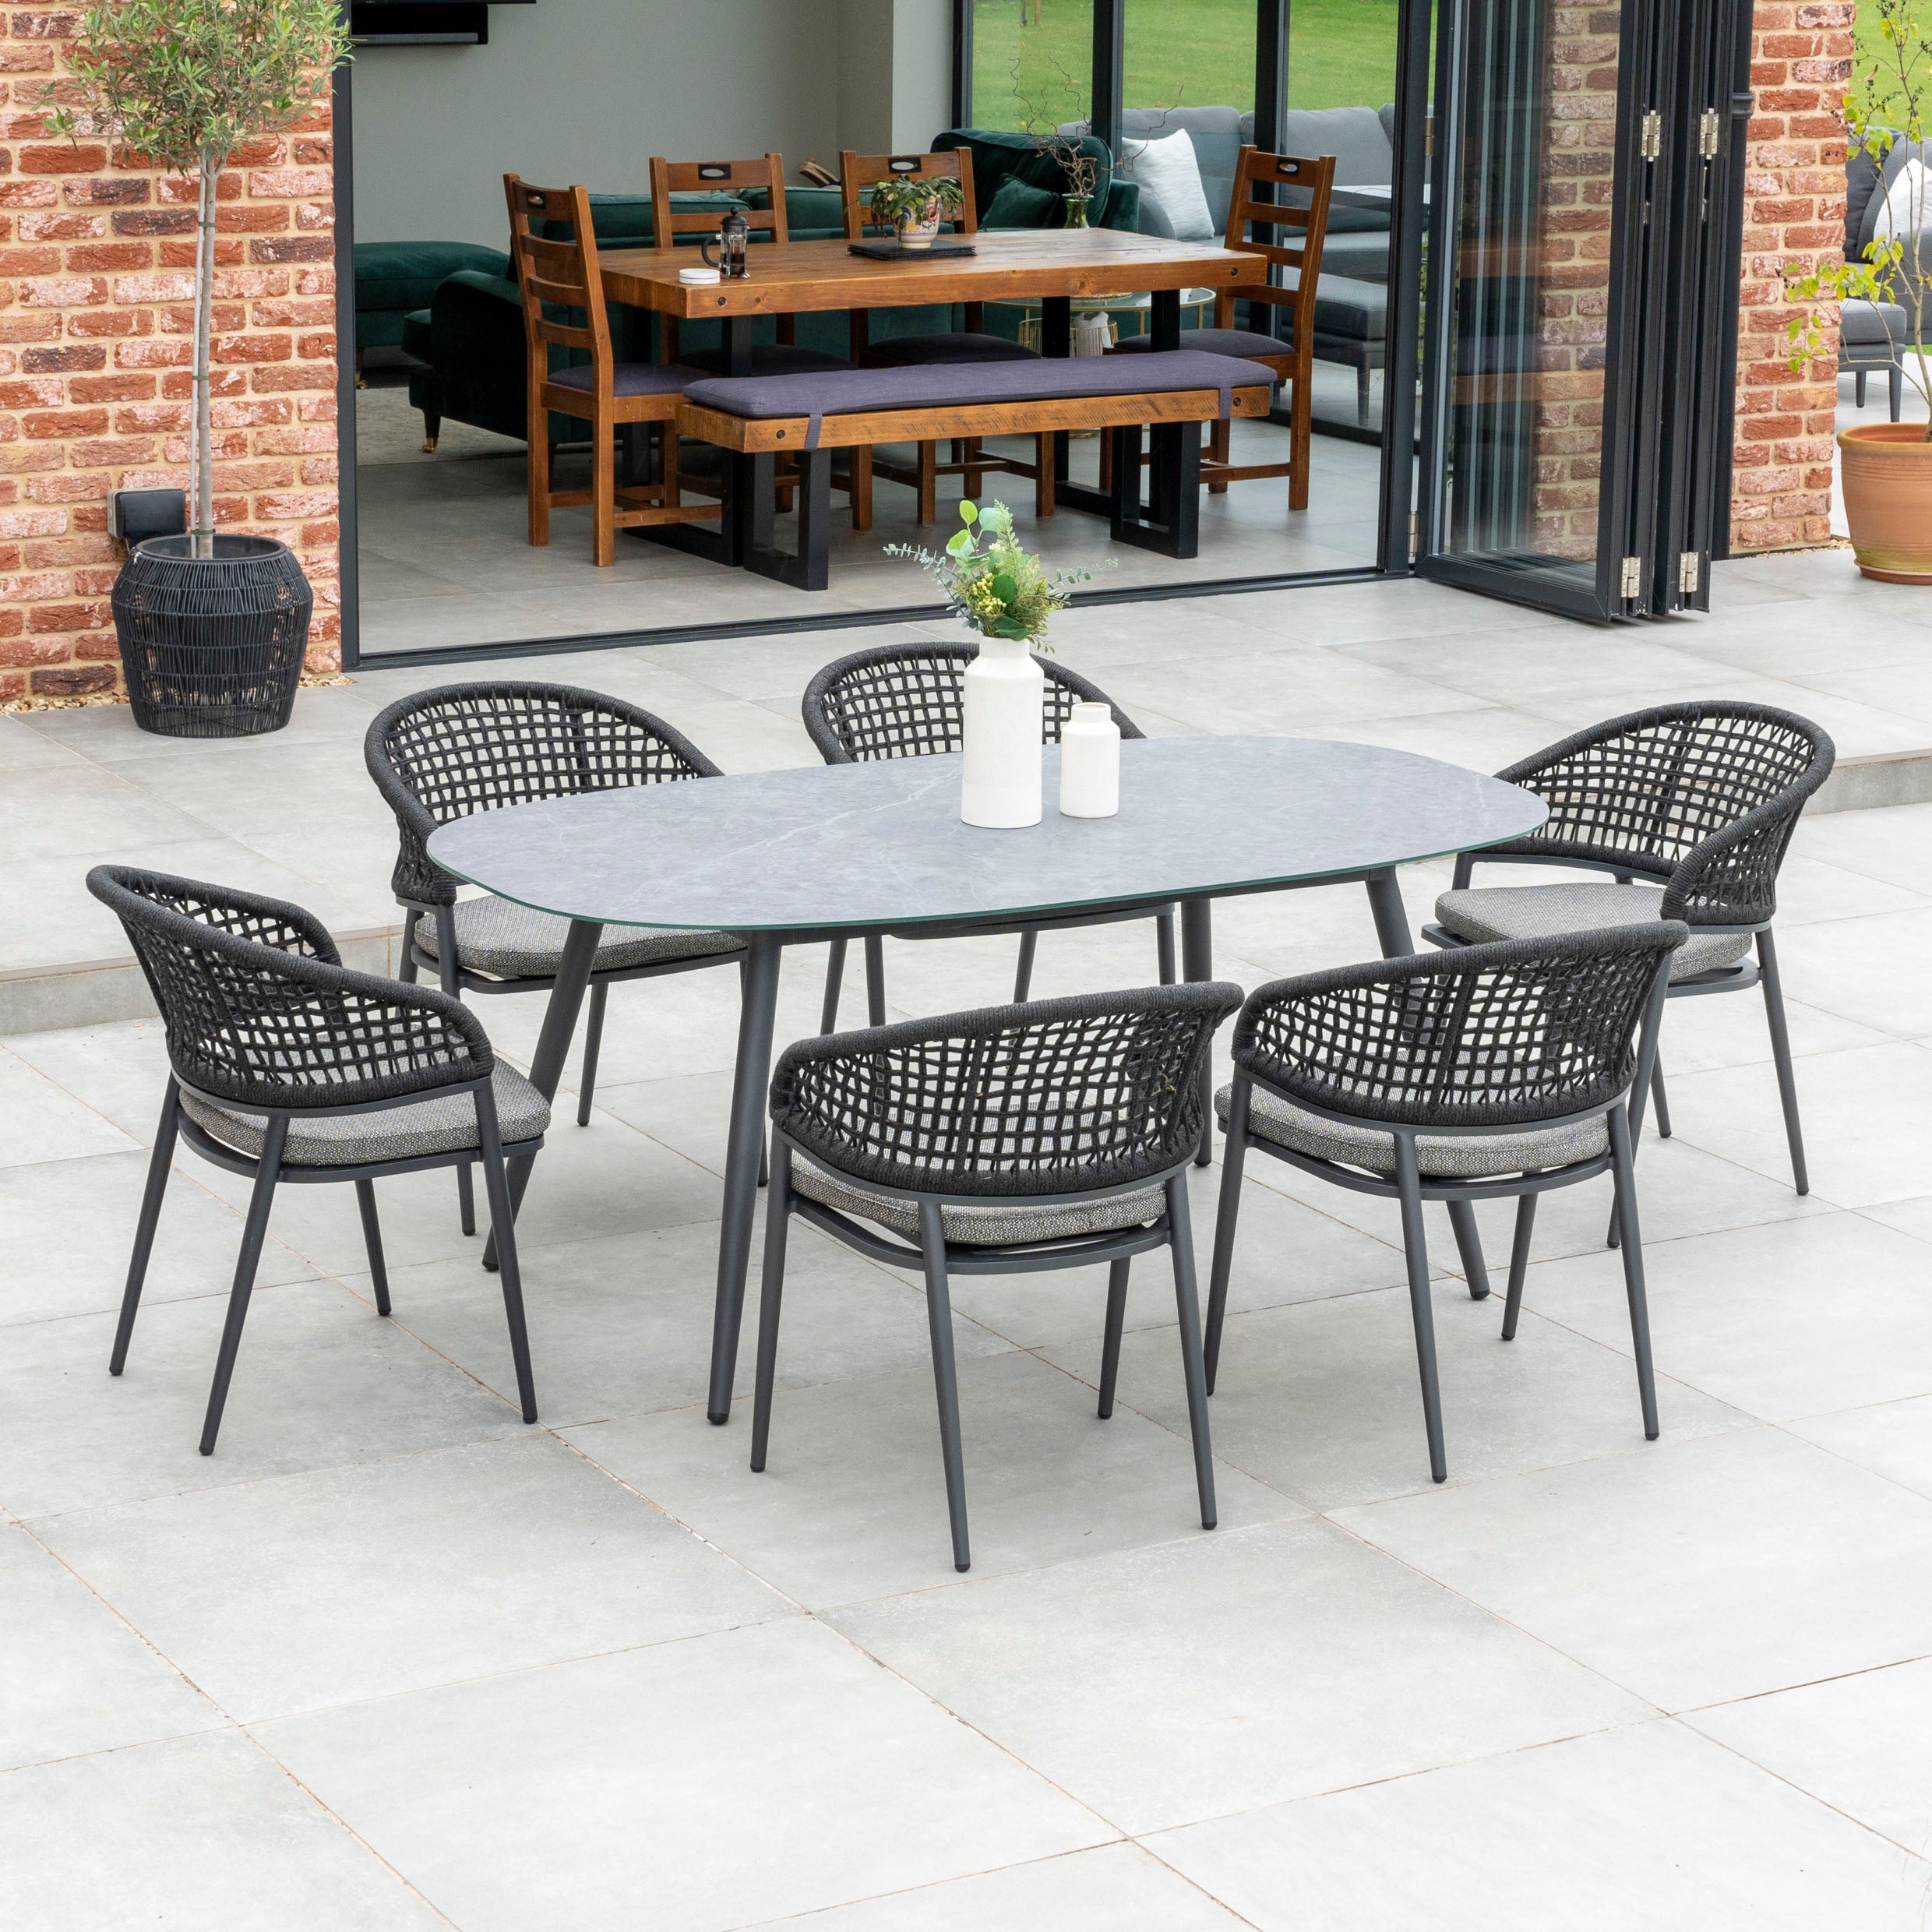 Kalama 6 Seat Rope Oval Dining Set with Ceramic Table in Charcoal